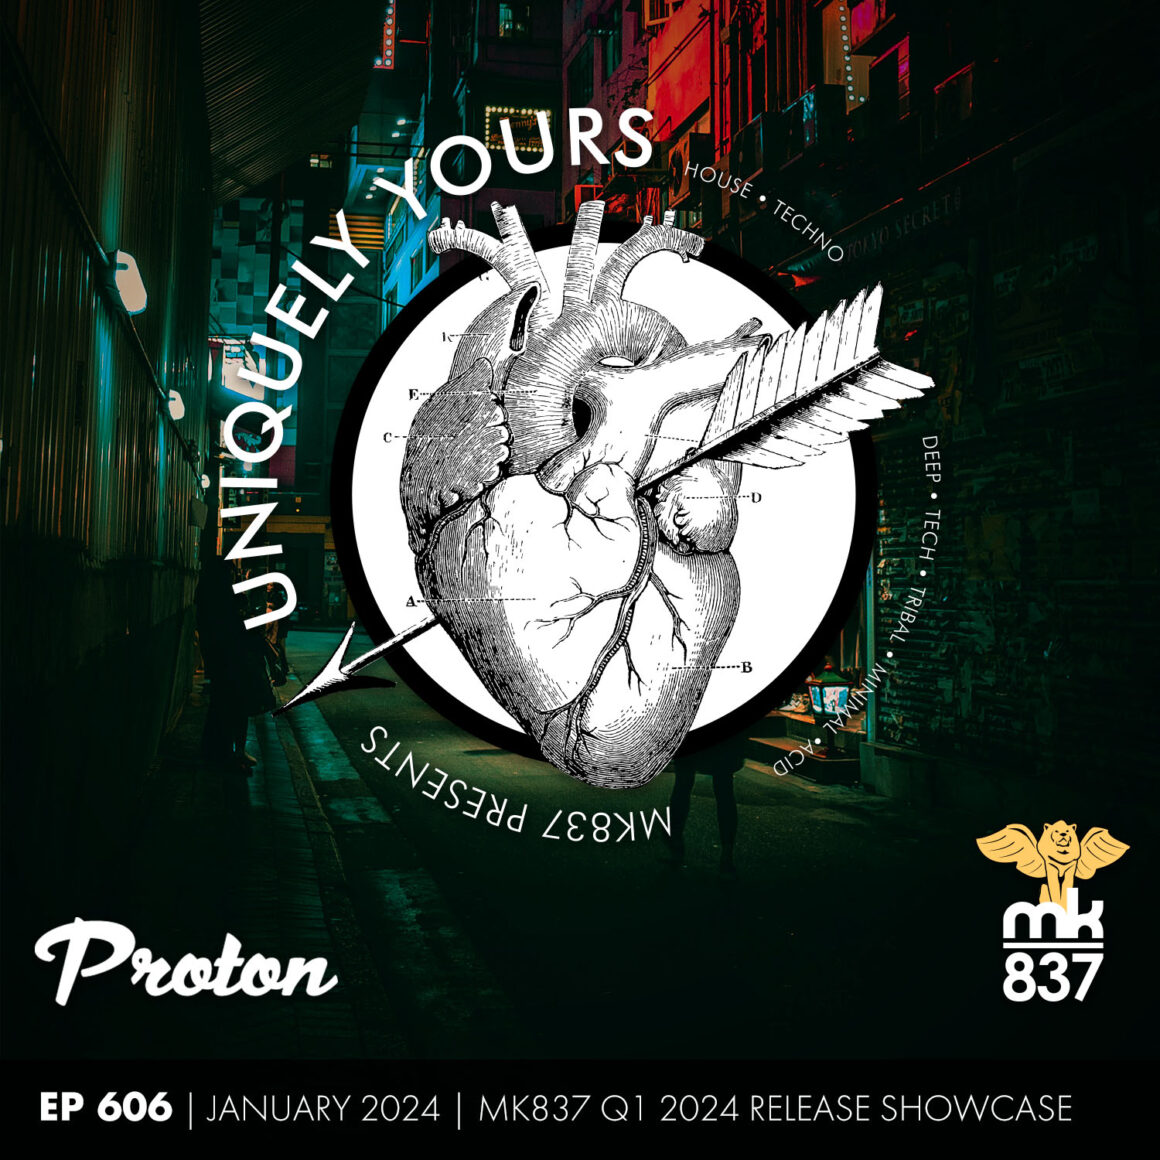 Uniquely Yours | EP 606 | January 2024 | MK837 Q1 2024 Release Showcase (Extended Mix)